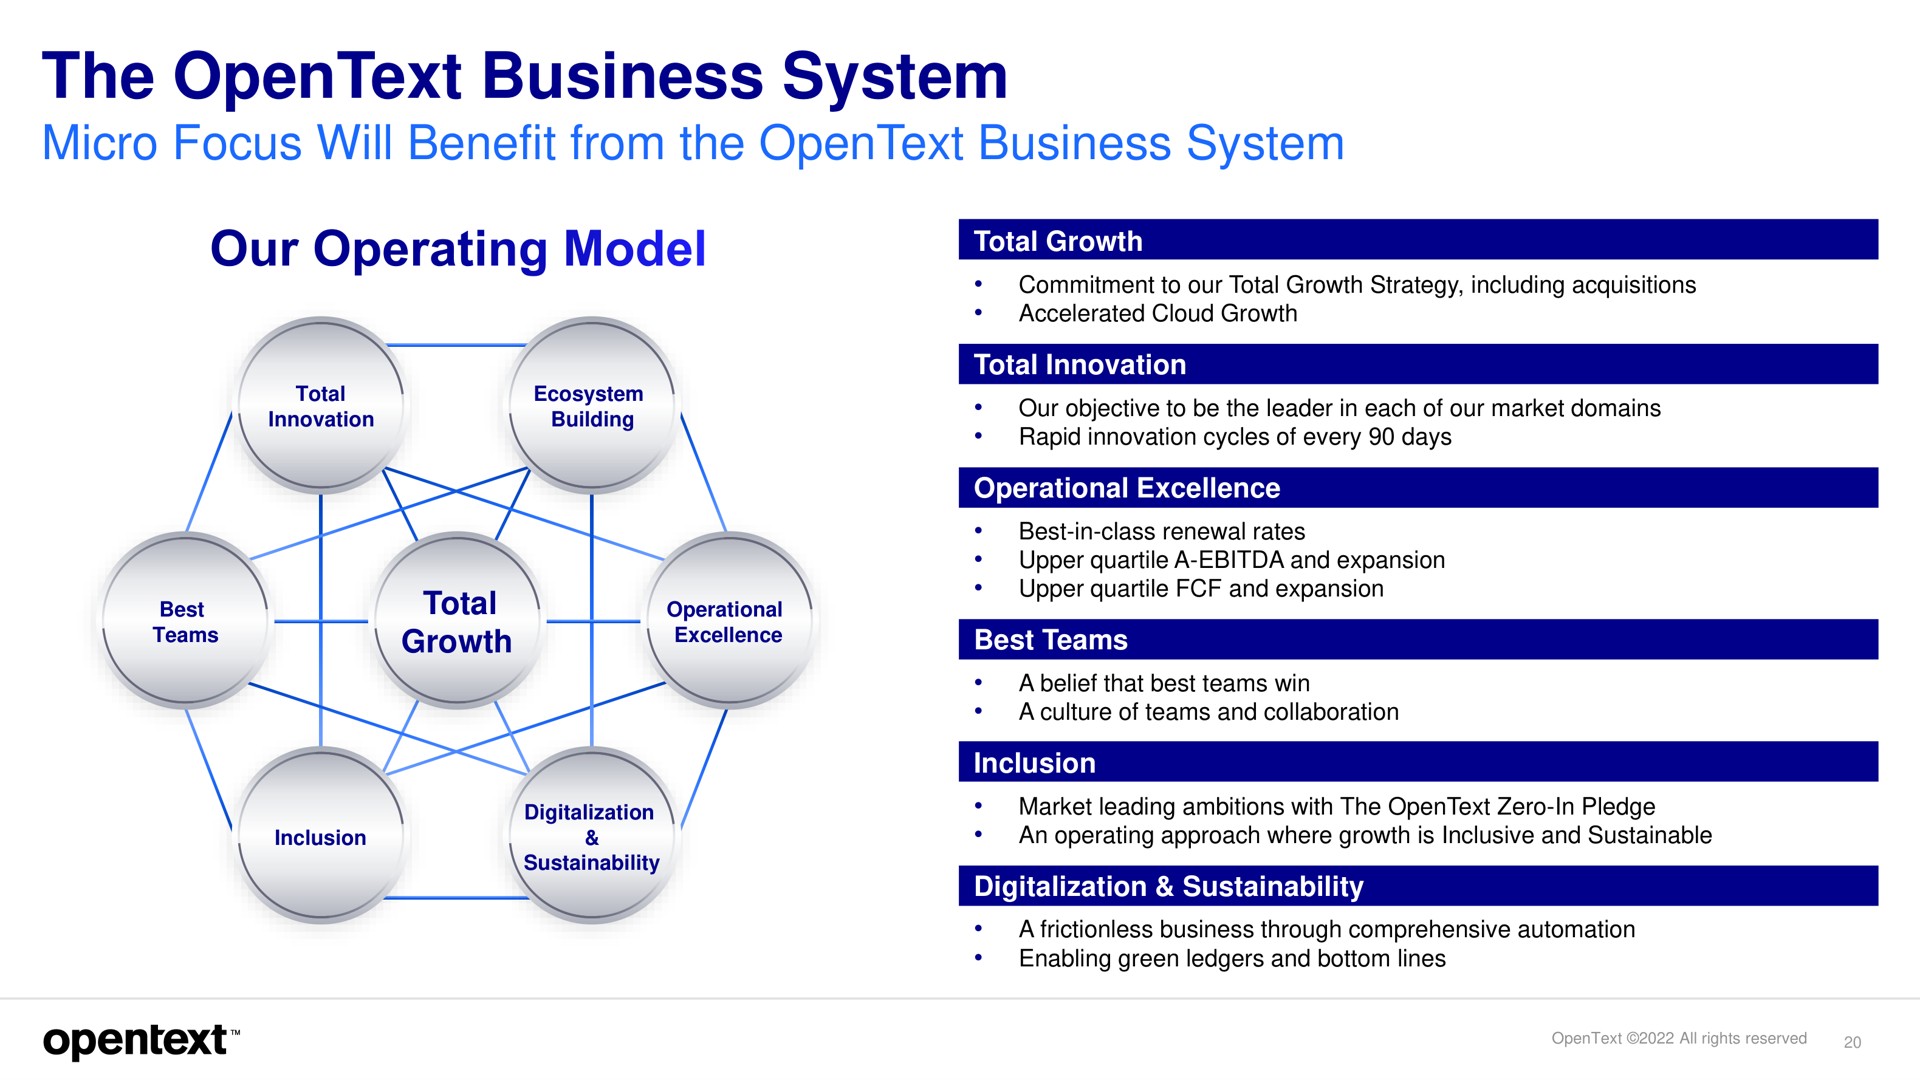 the business system | OpenText